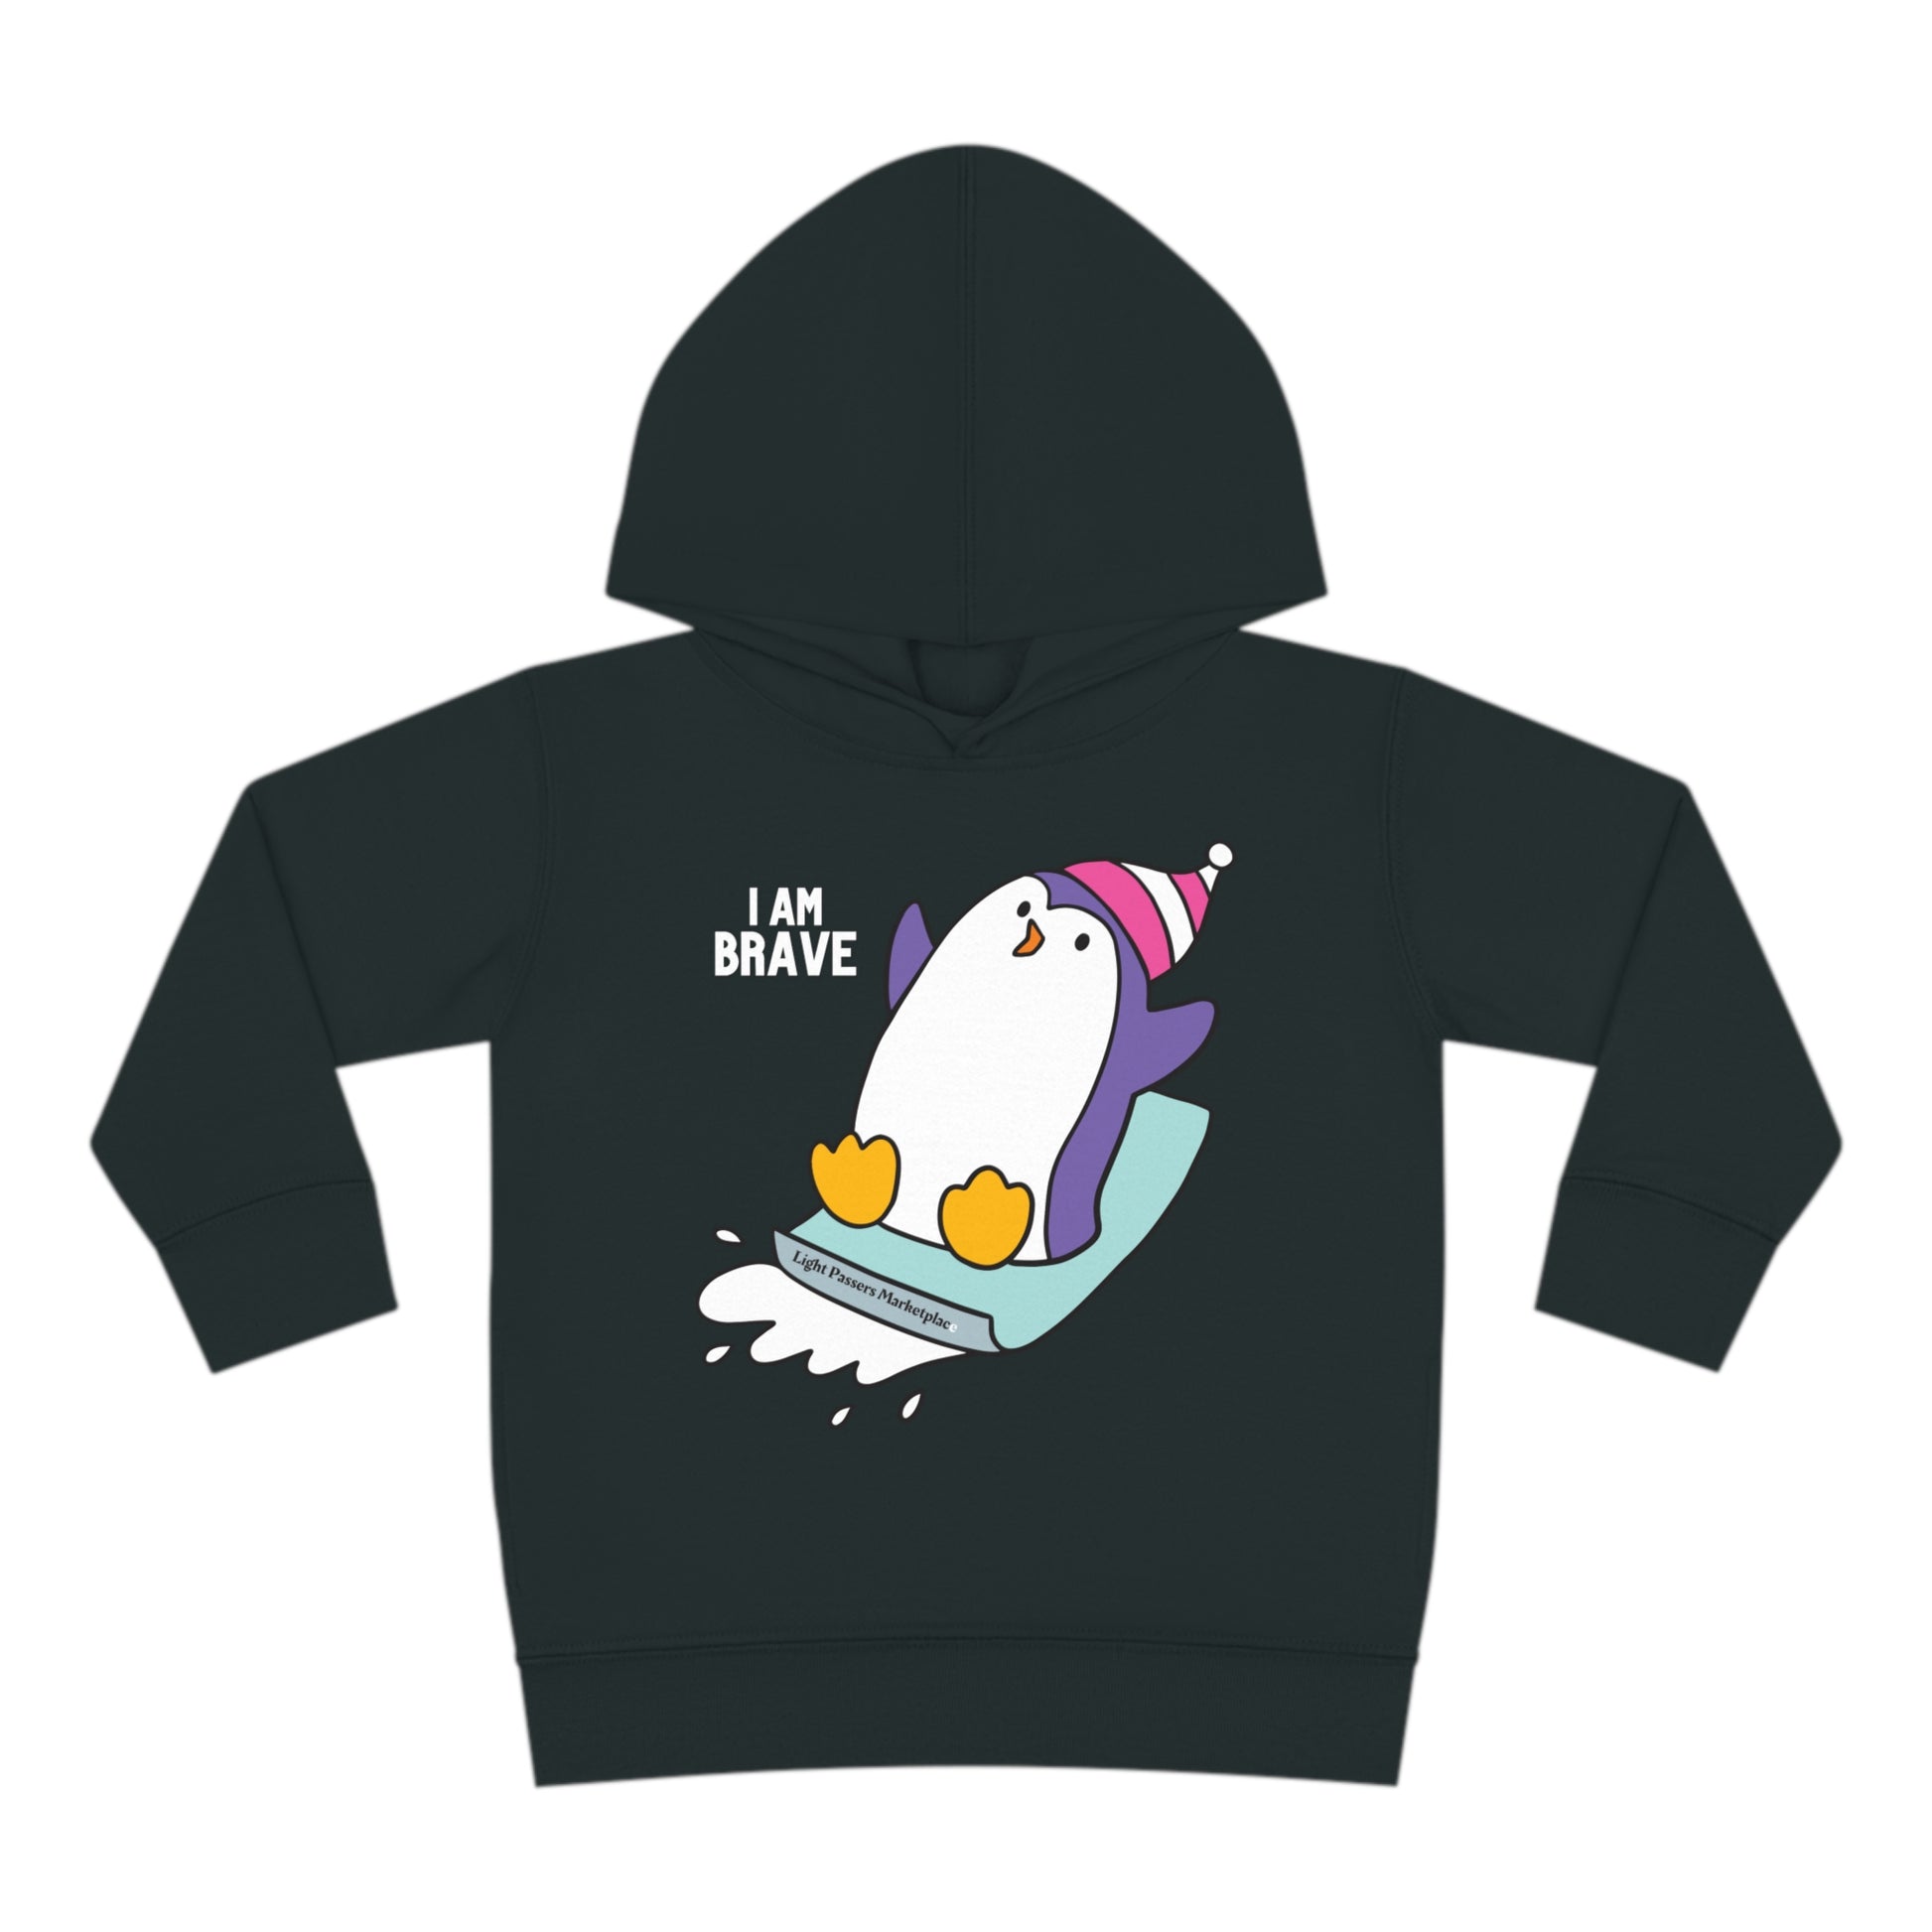 A Rabbit Skins toddler hoodie with a penguin design, featuring a jersey-lined hood, double-needle hem, cover-stitched details, and side seam pockets for lasting coziness.